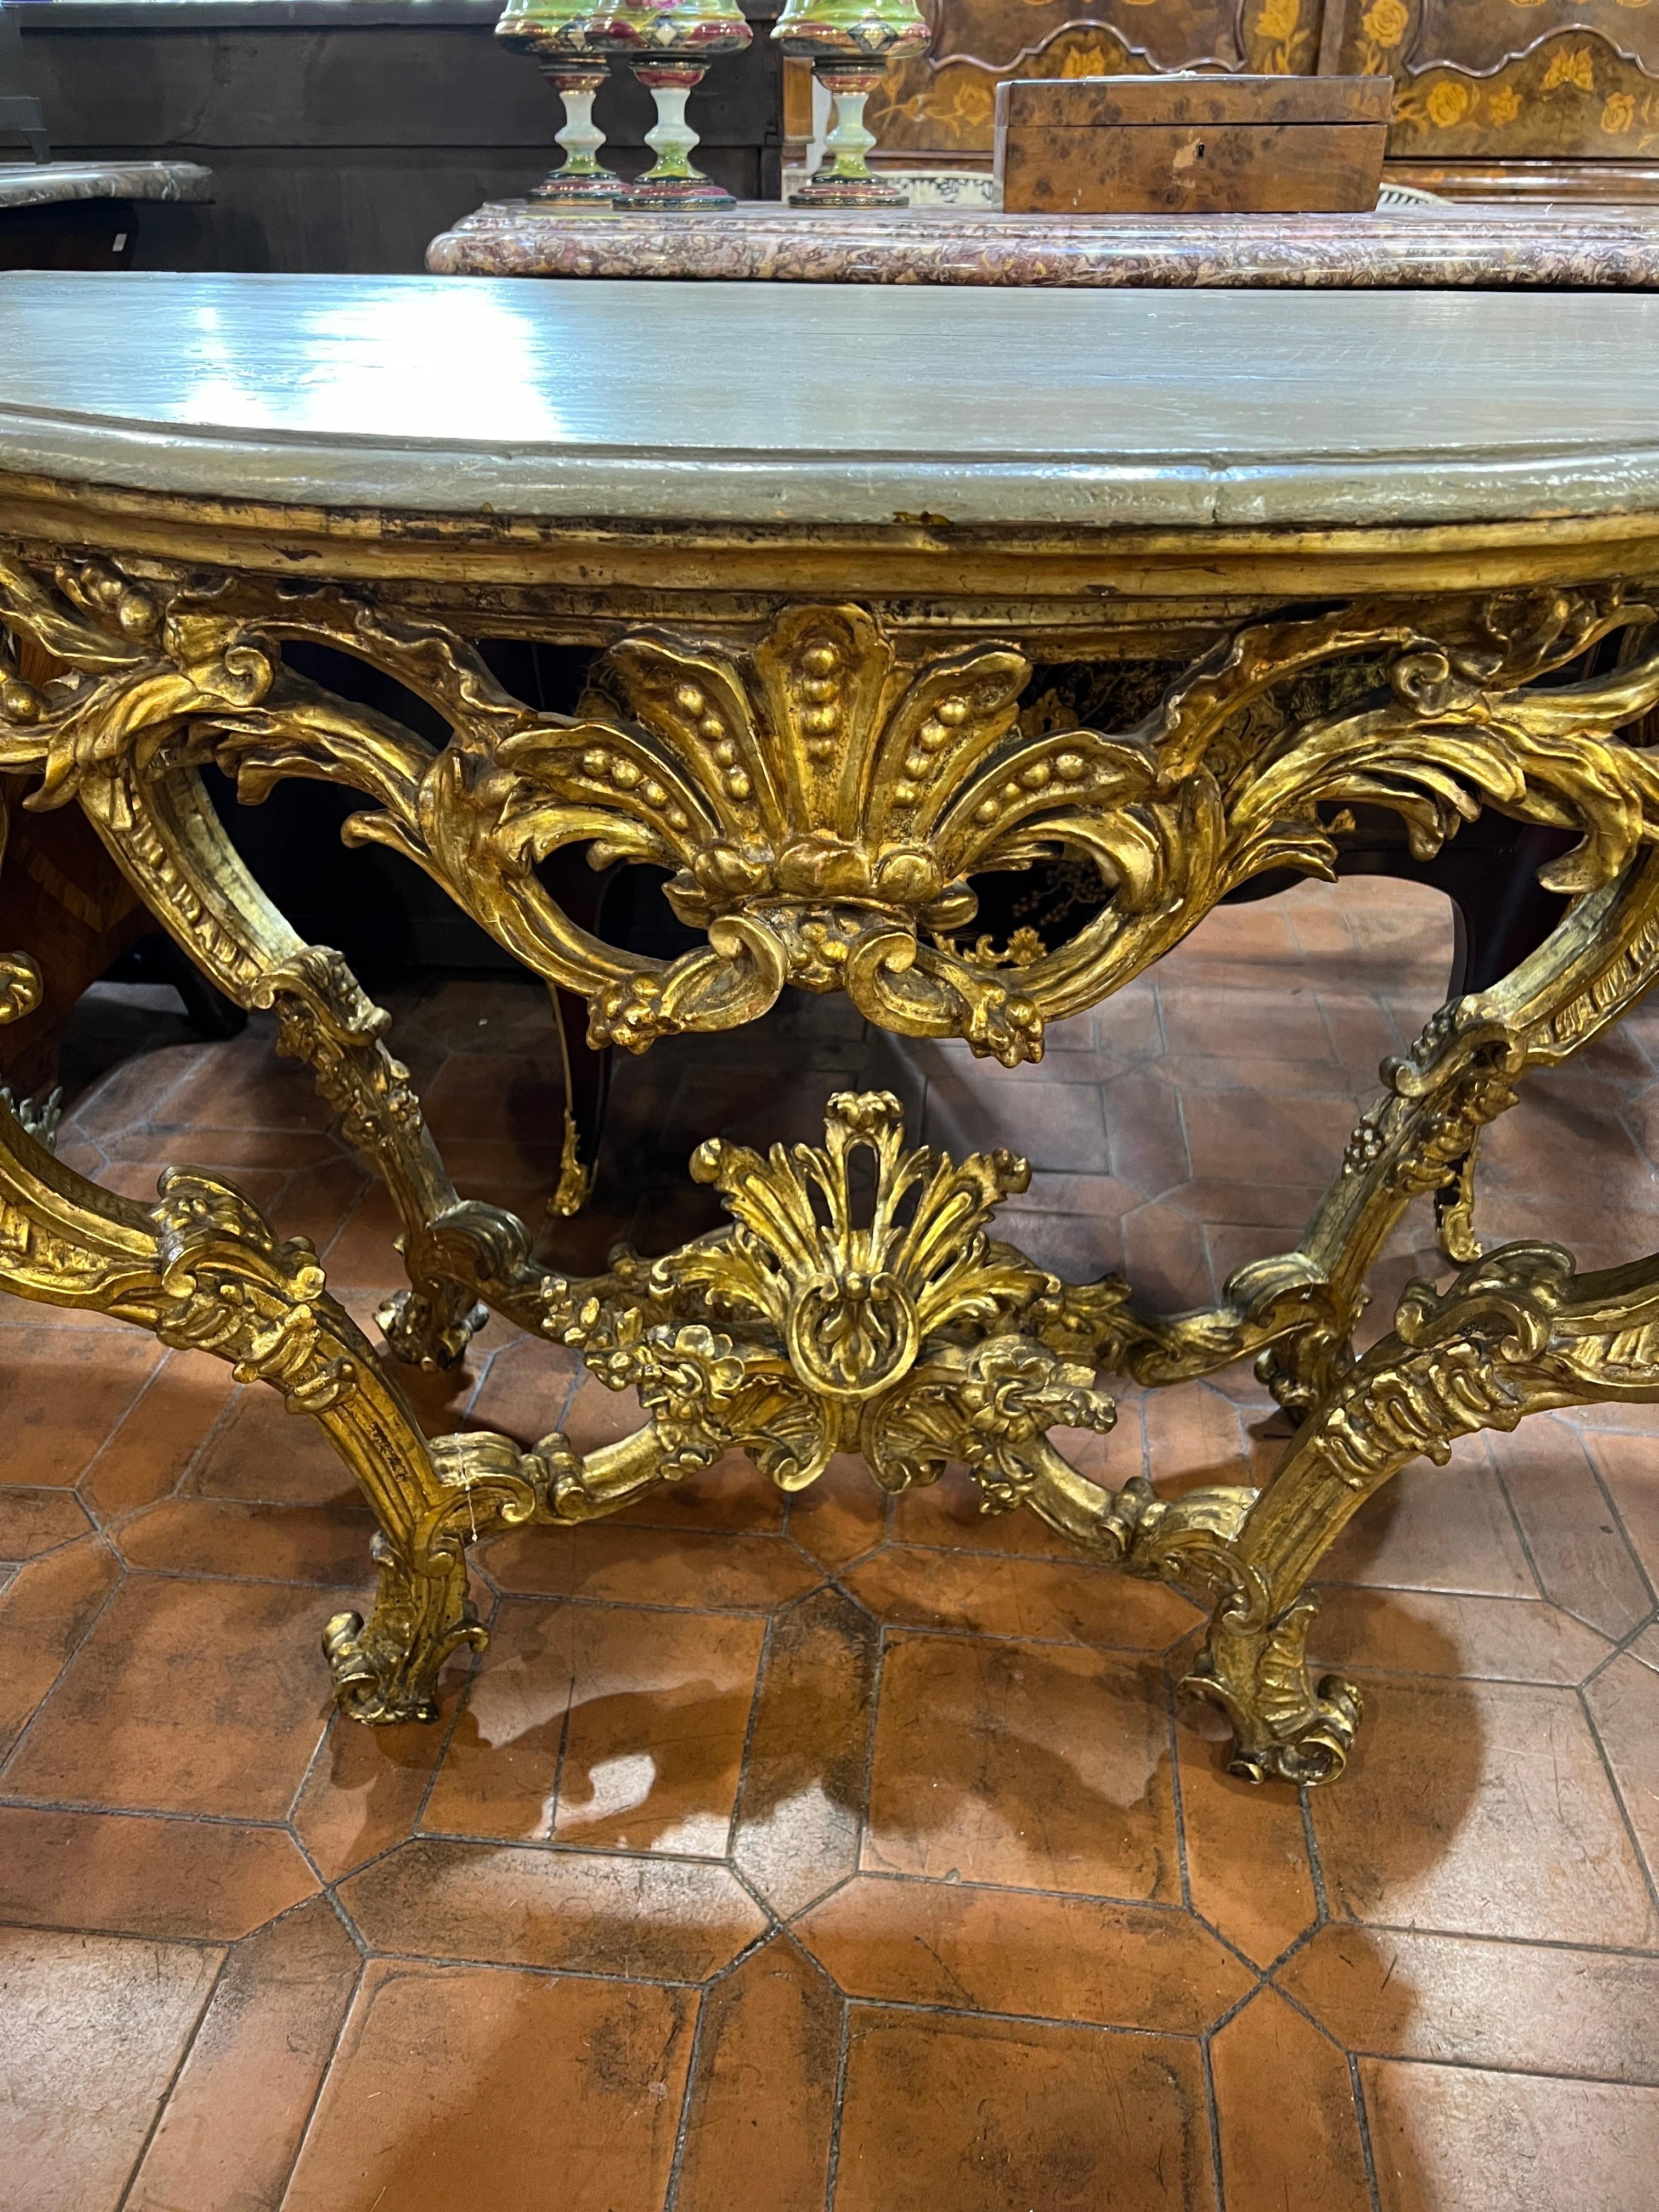 Fantastic Console of Sabauda provenance, Italy Piedmont region, carved and carved wood with floral and geometric motifs, gilded with gold leaf and gray-painted wood top, provenance Castello di San Giorgio Canavese, province of Turin. Provenance